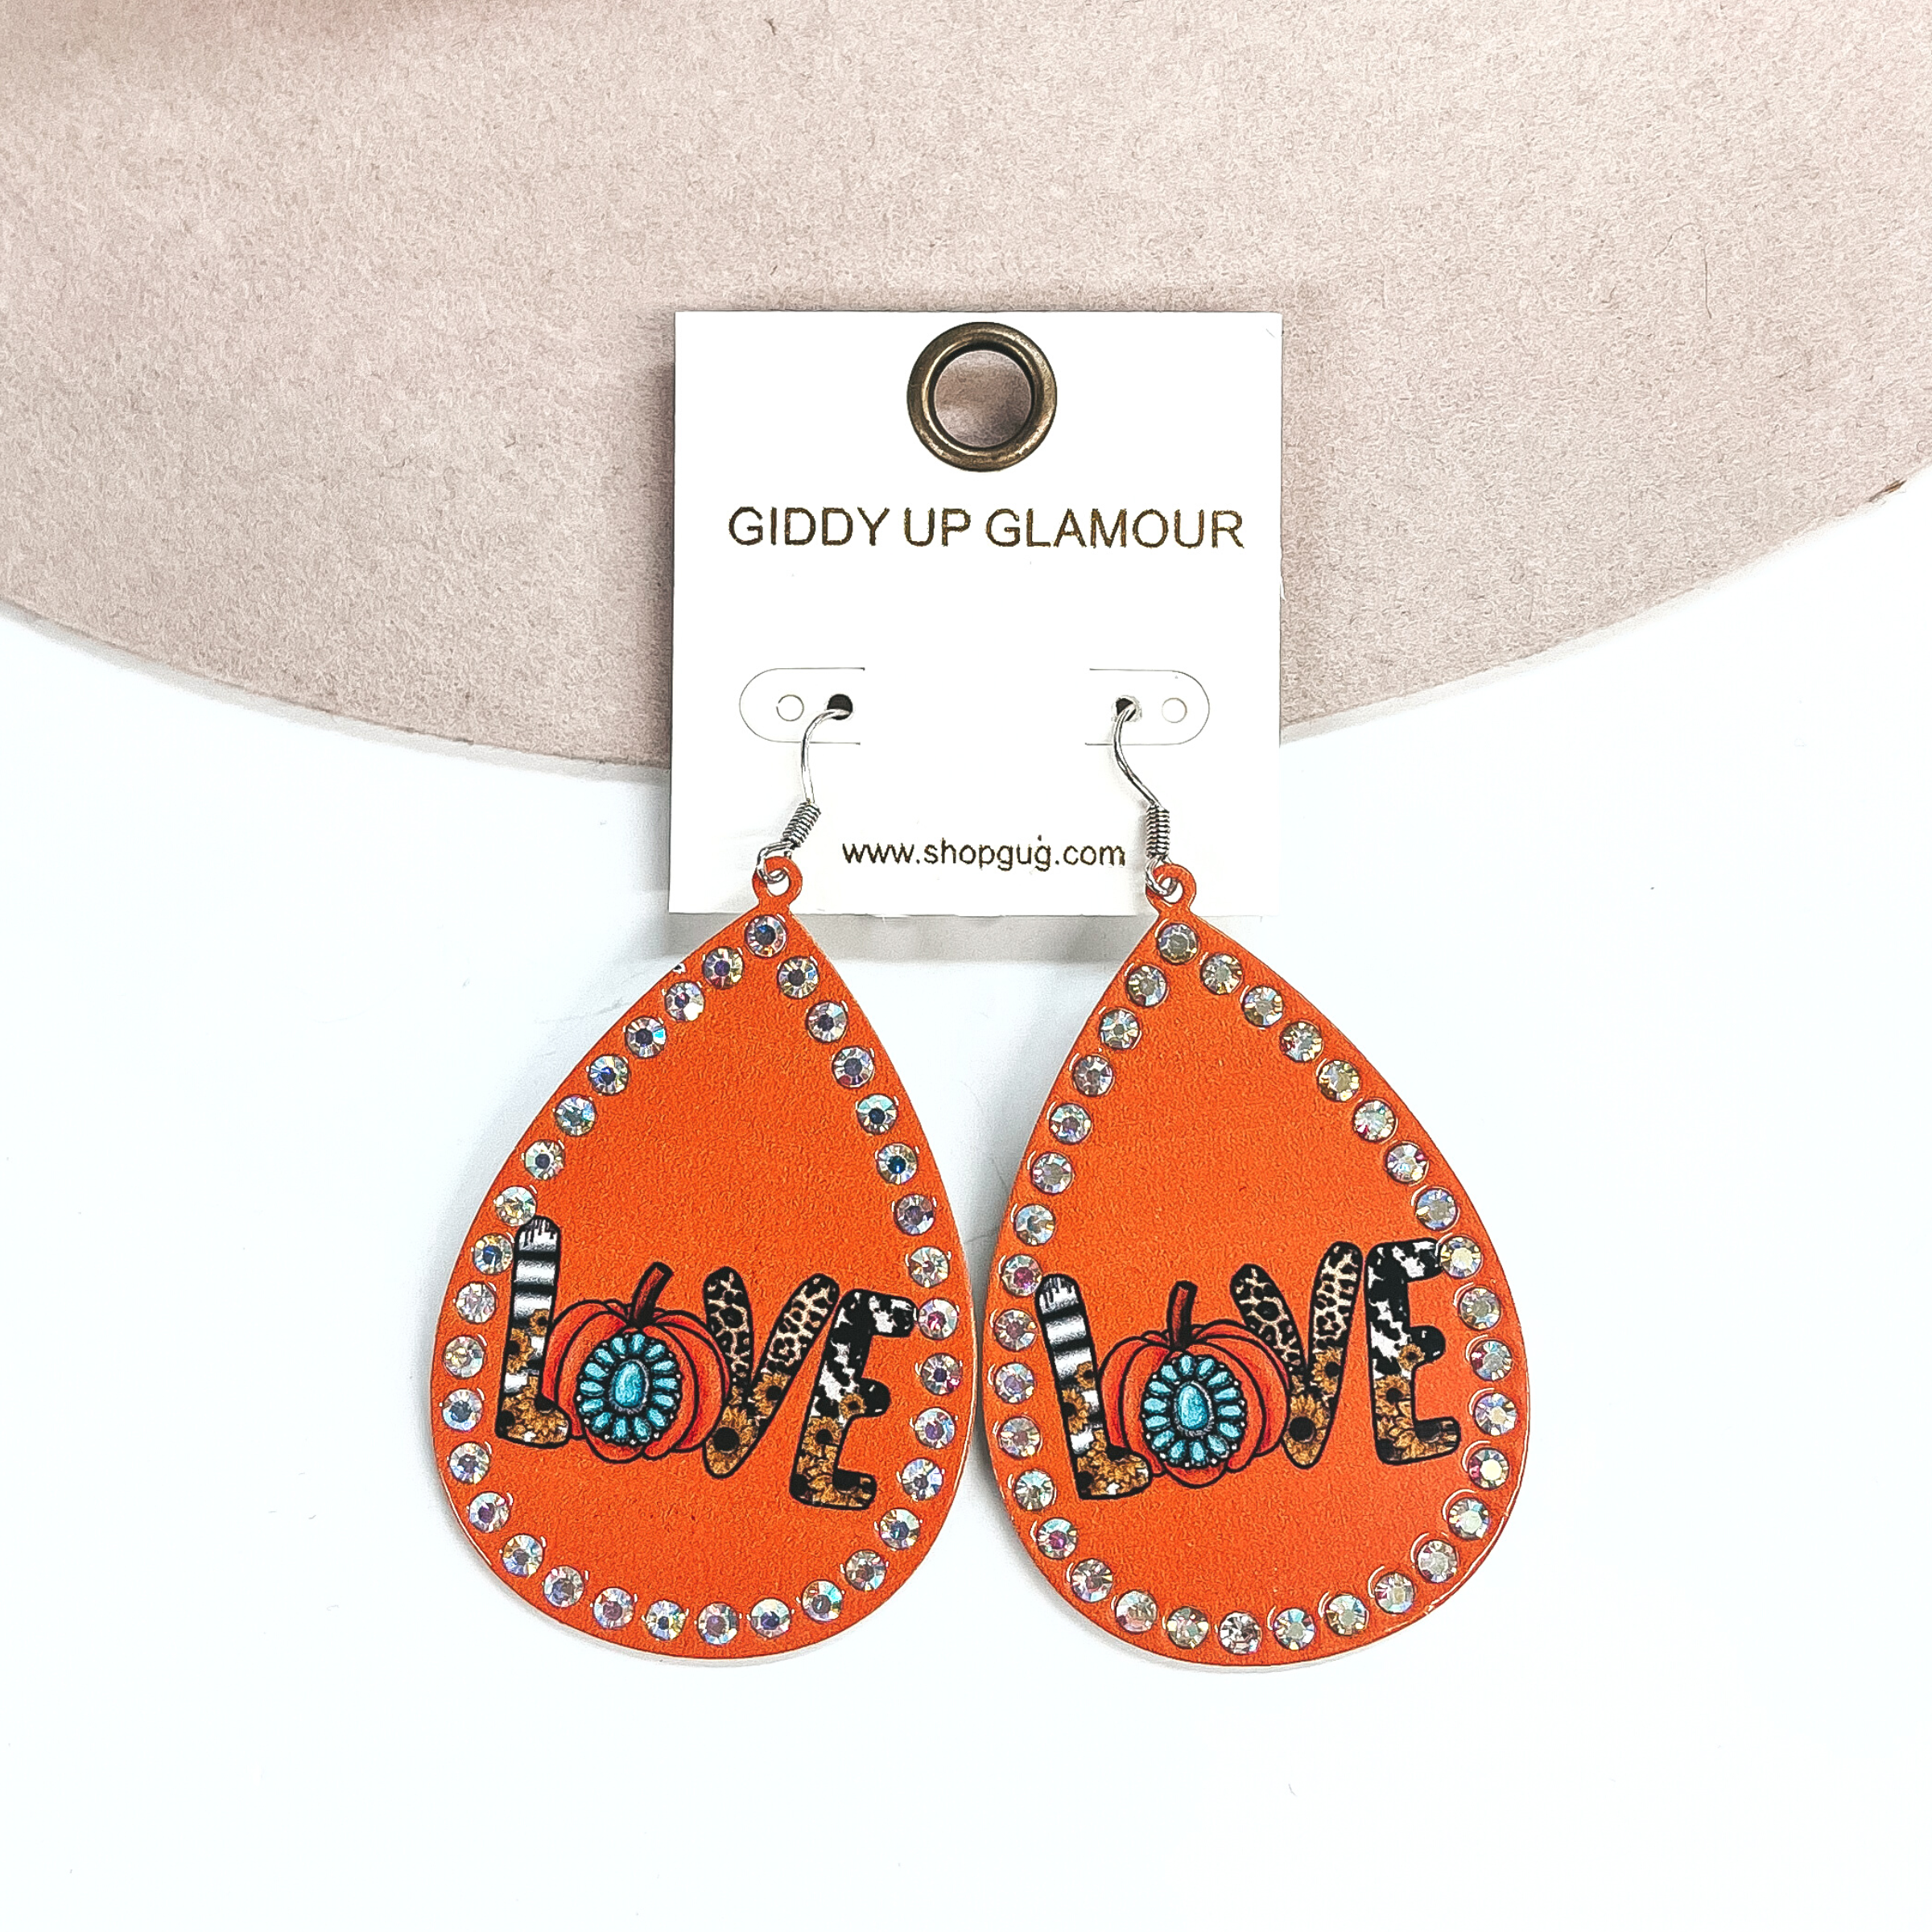 These are teardrop earrings in orange with AB crystals all around. In the middle it says 'Love' , each letter has different prints and designs. The 'O' is an orange pumpkin with a turquoise concho in the center. These earrings are taken laying on a beige color hat brim and on a white background